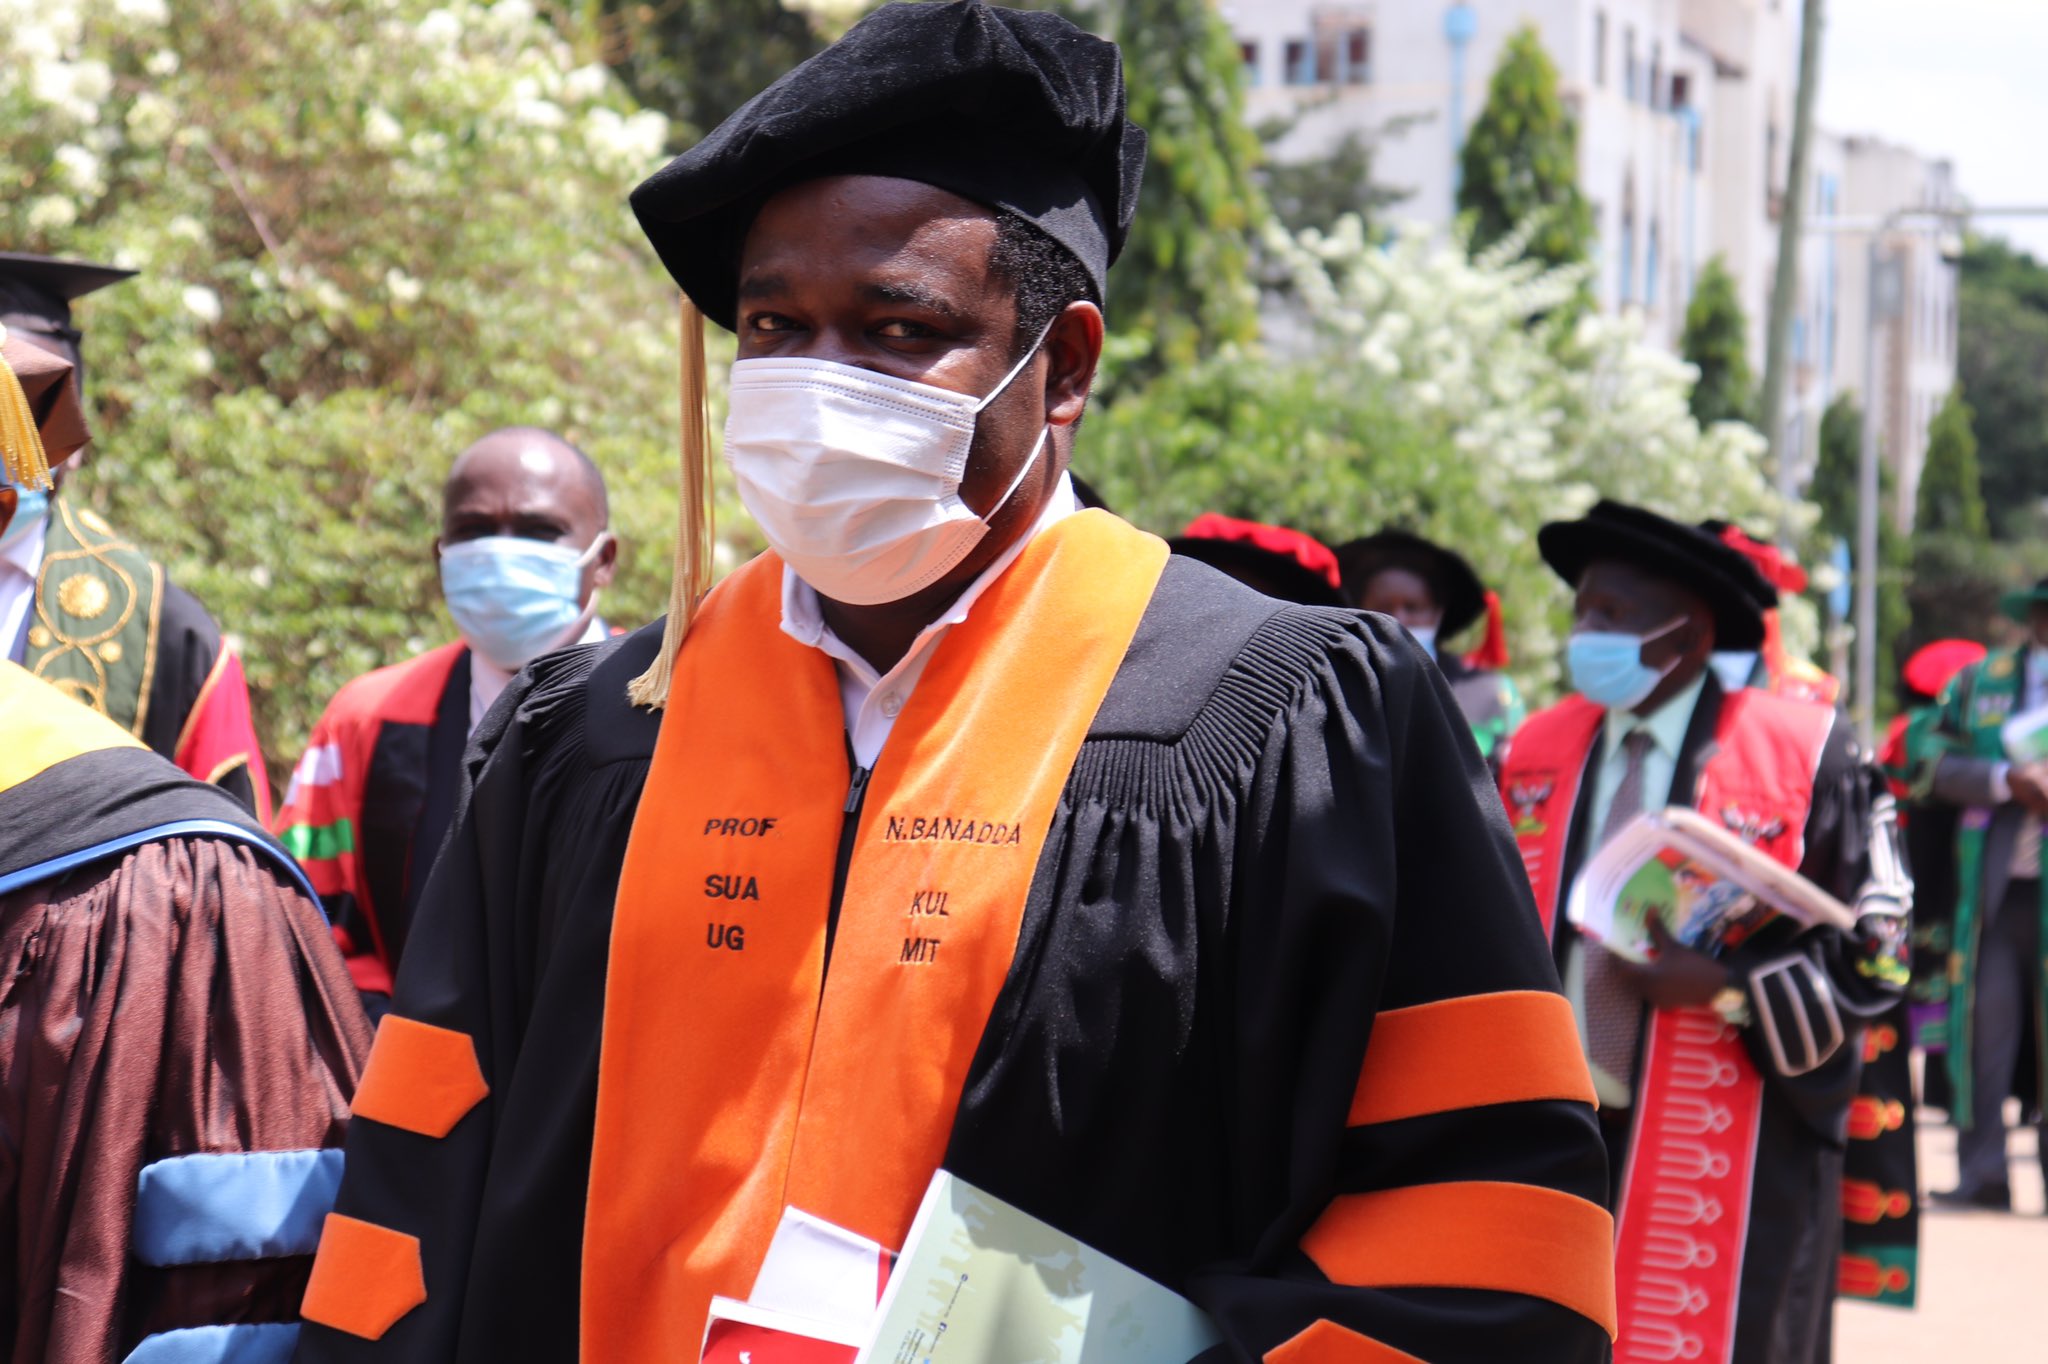 The late Prof. Noble Banadda in the Academic Procession of the 71st Graduation Ceremony of Makerere University held 17th to 21st May 2021.